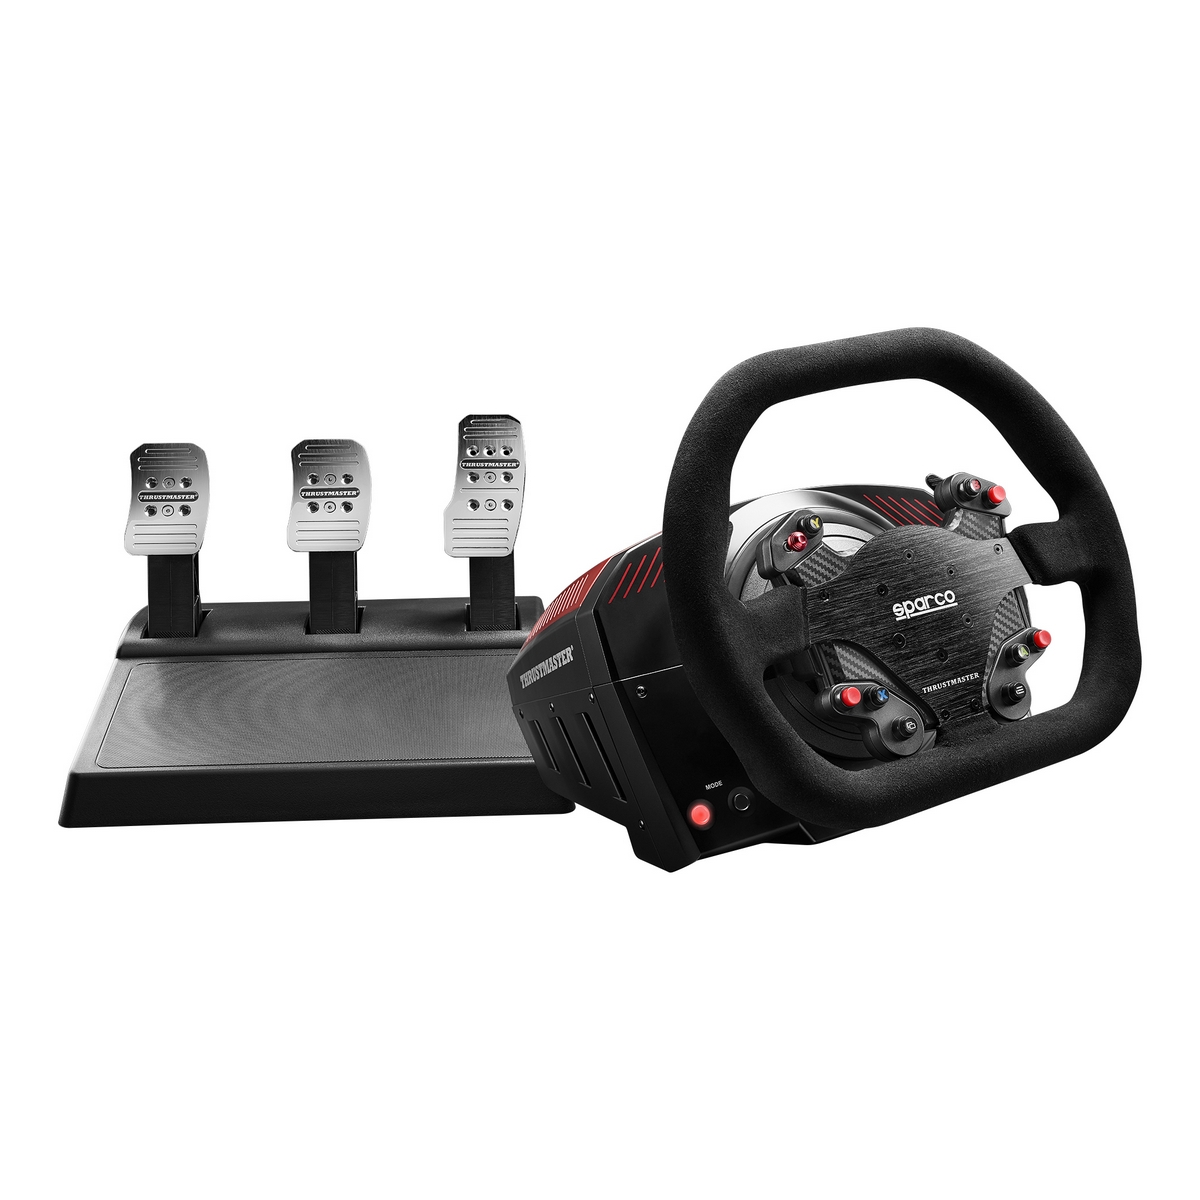 Thrustmaster TS-XW Racer Sparco P310 Competition Mod Racing Wheel and Pedals (PC/XBOX ONE 4468009)